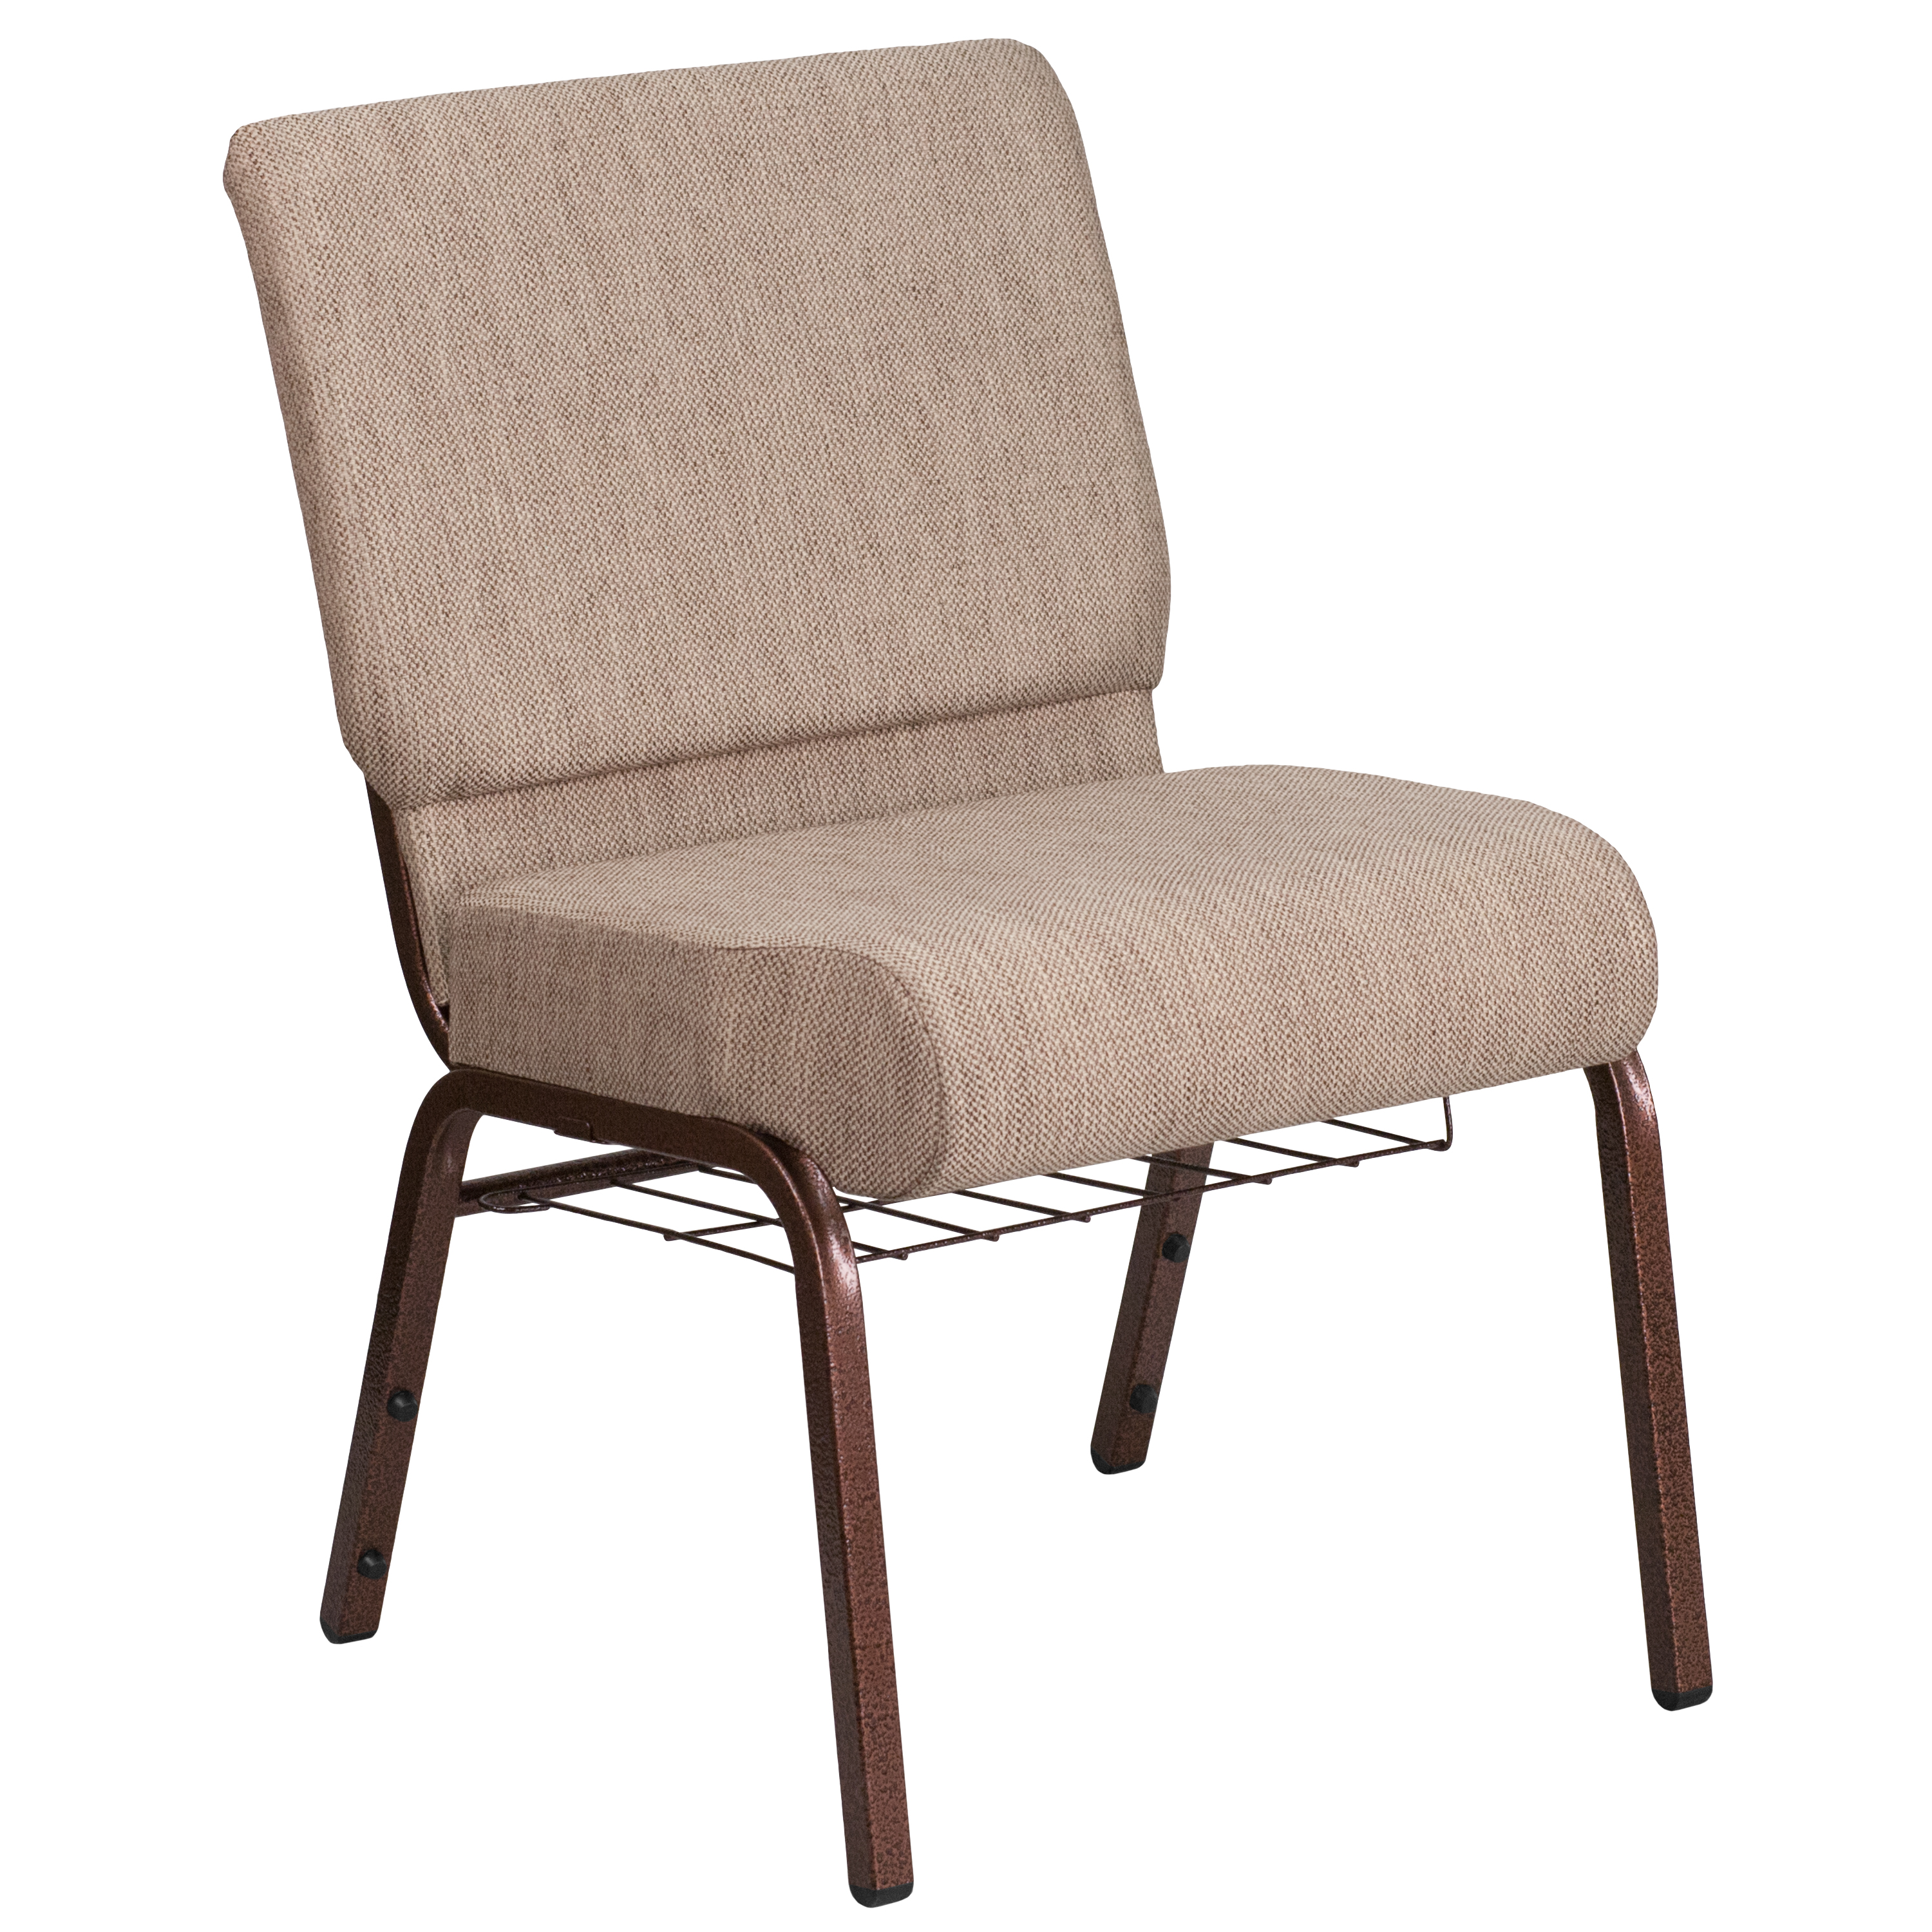 Flash Furniture HERCULES Series 21''W Church Chair in Beige Fabric with Book Rack - Copper Vein Frame - image 2 of 11